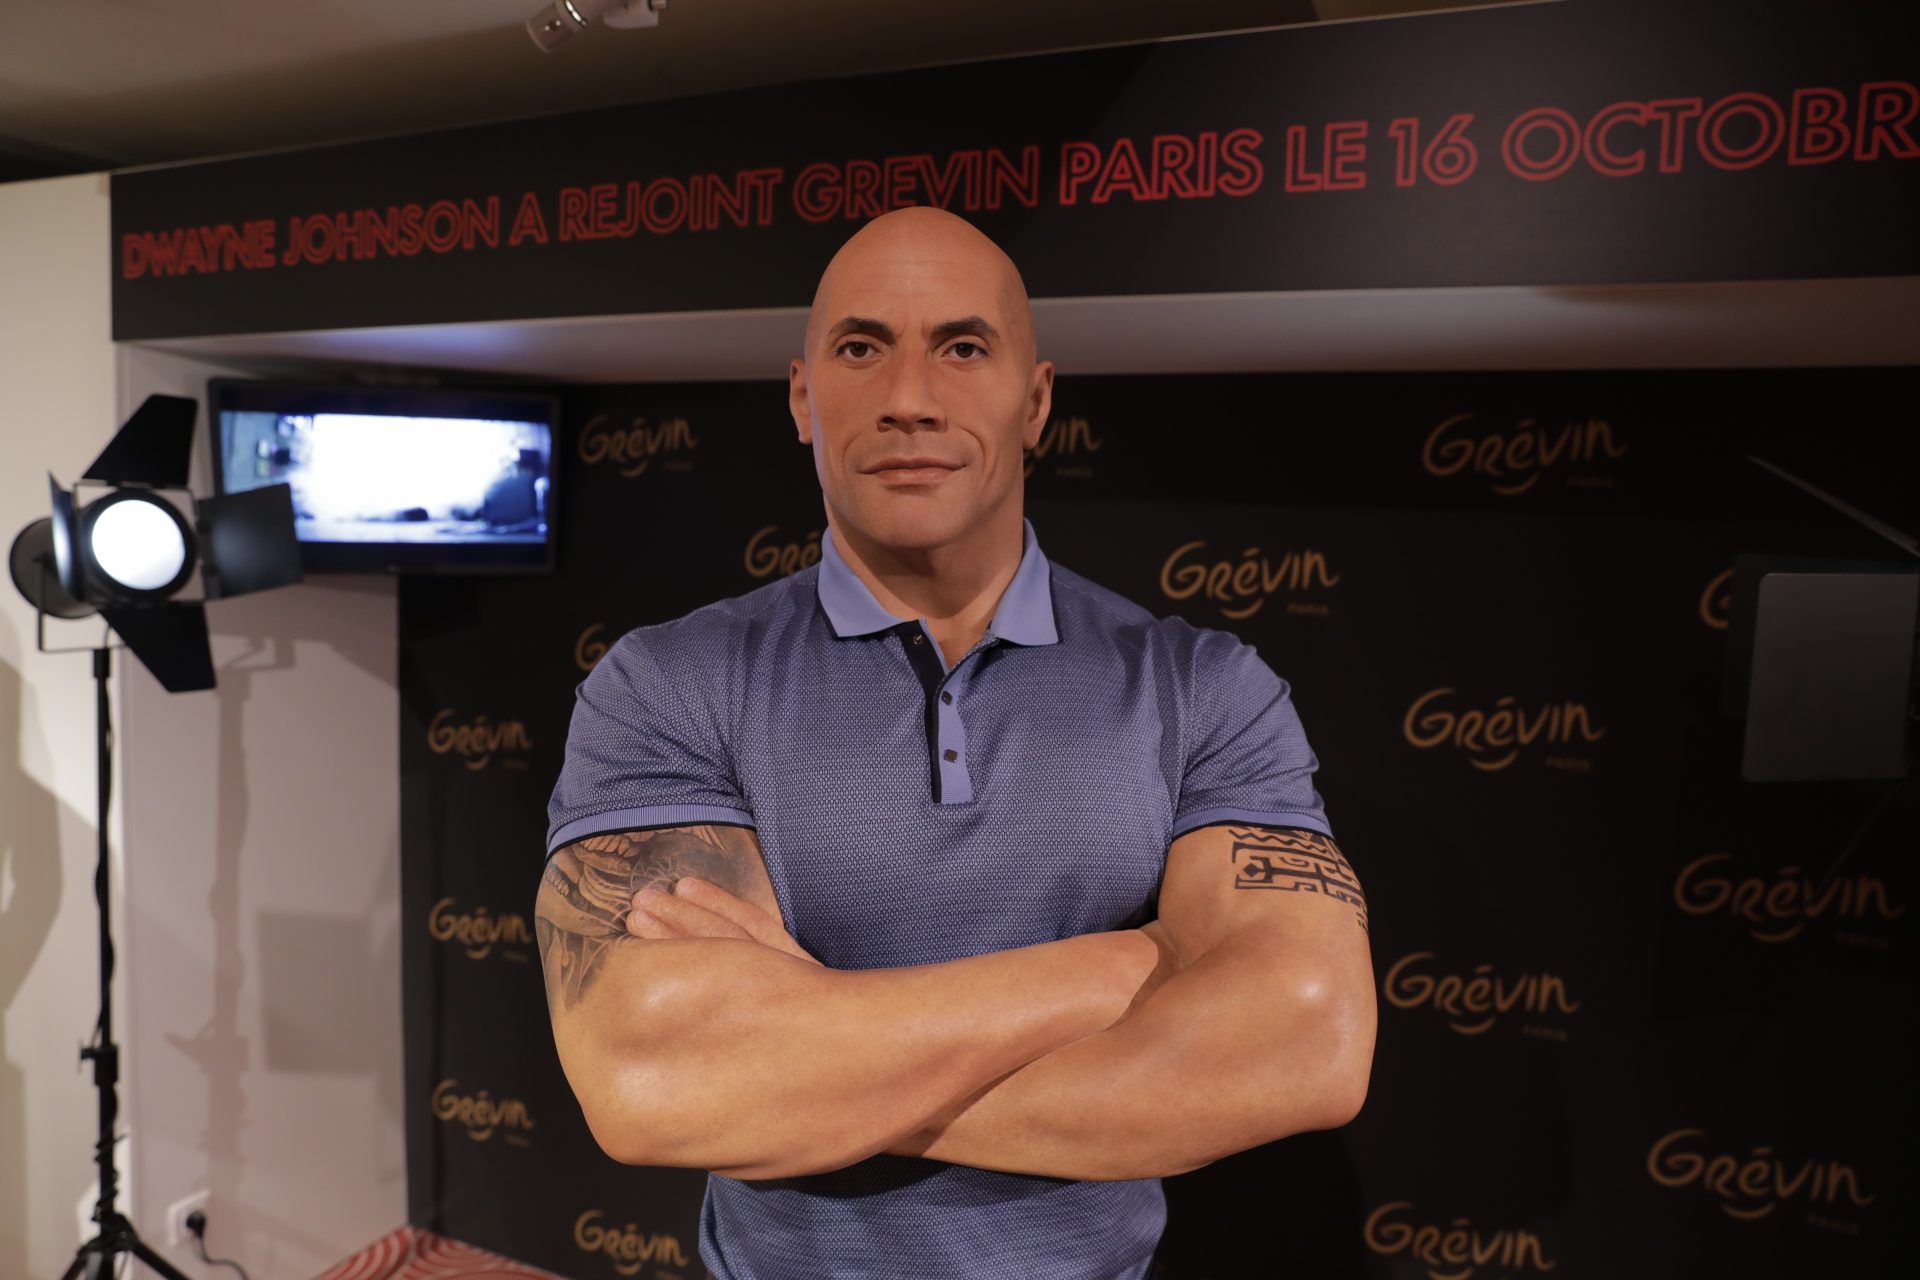 Issa Re-Do! French Museum Is Updating The Rock's Wax Figure After Skin Tone Backlash (Video)